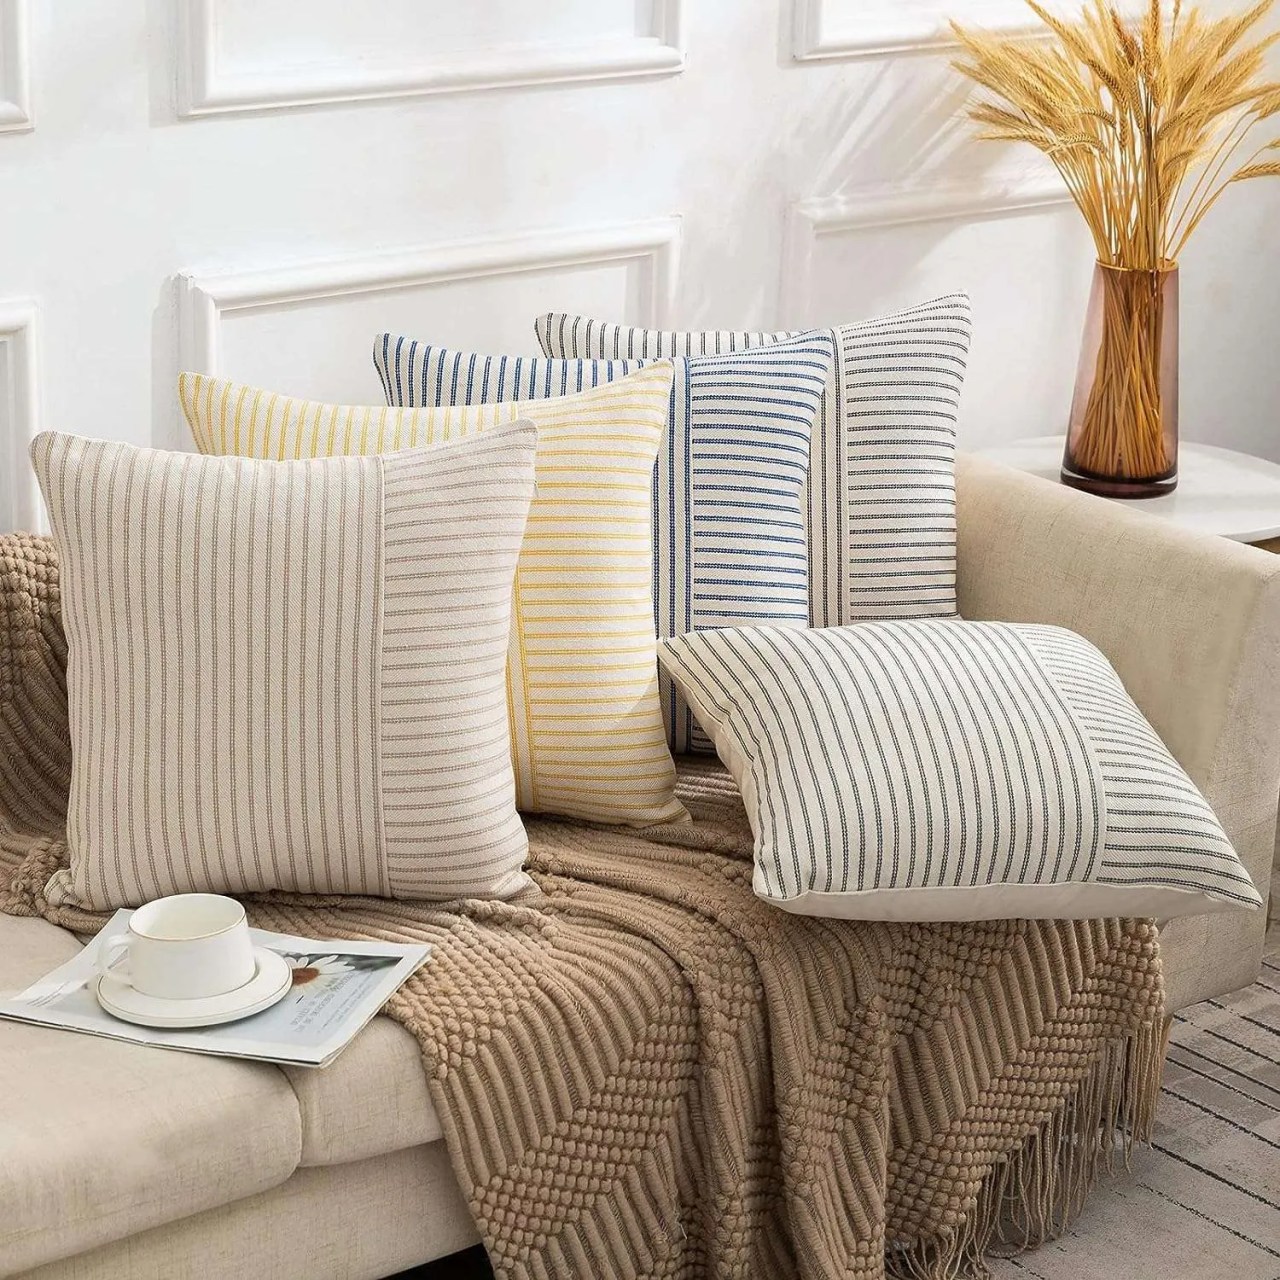 cushions in neutral colours